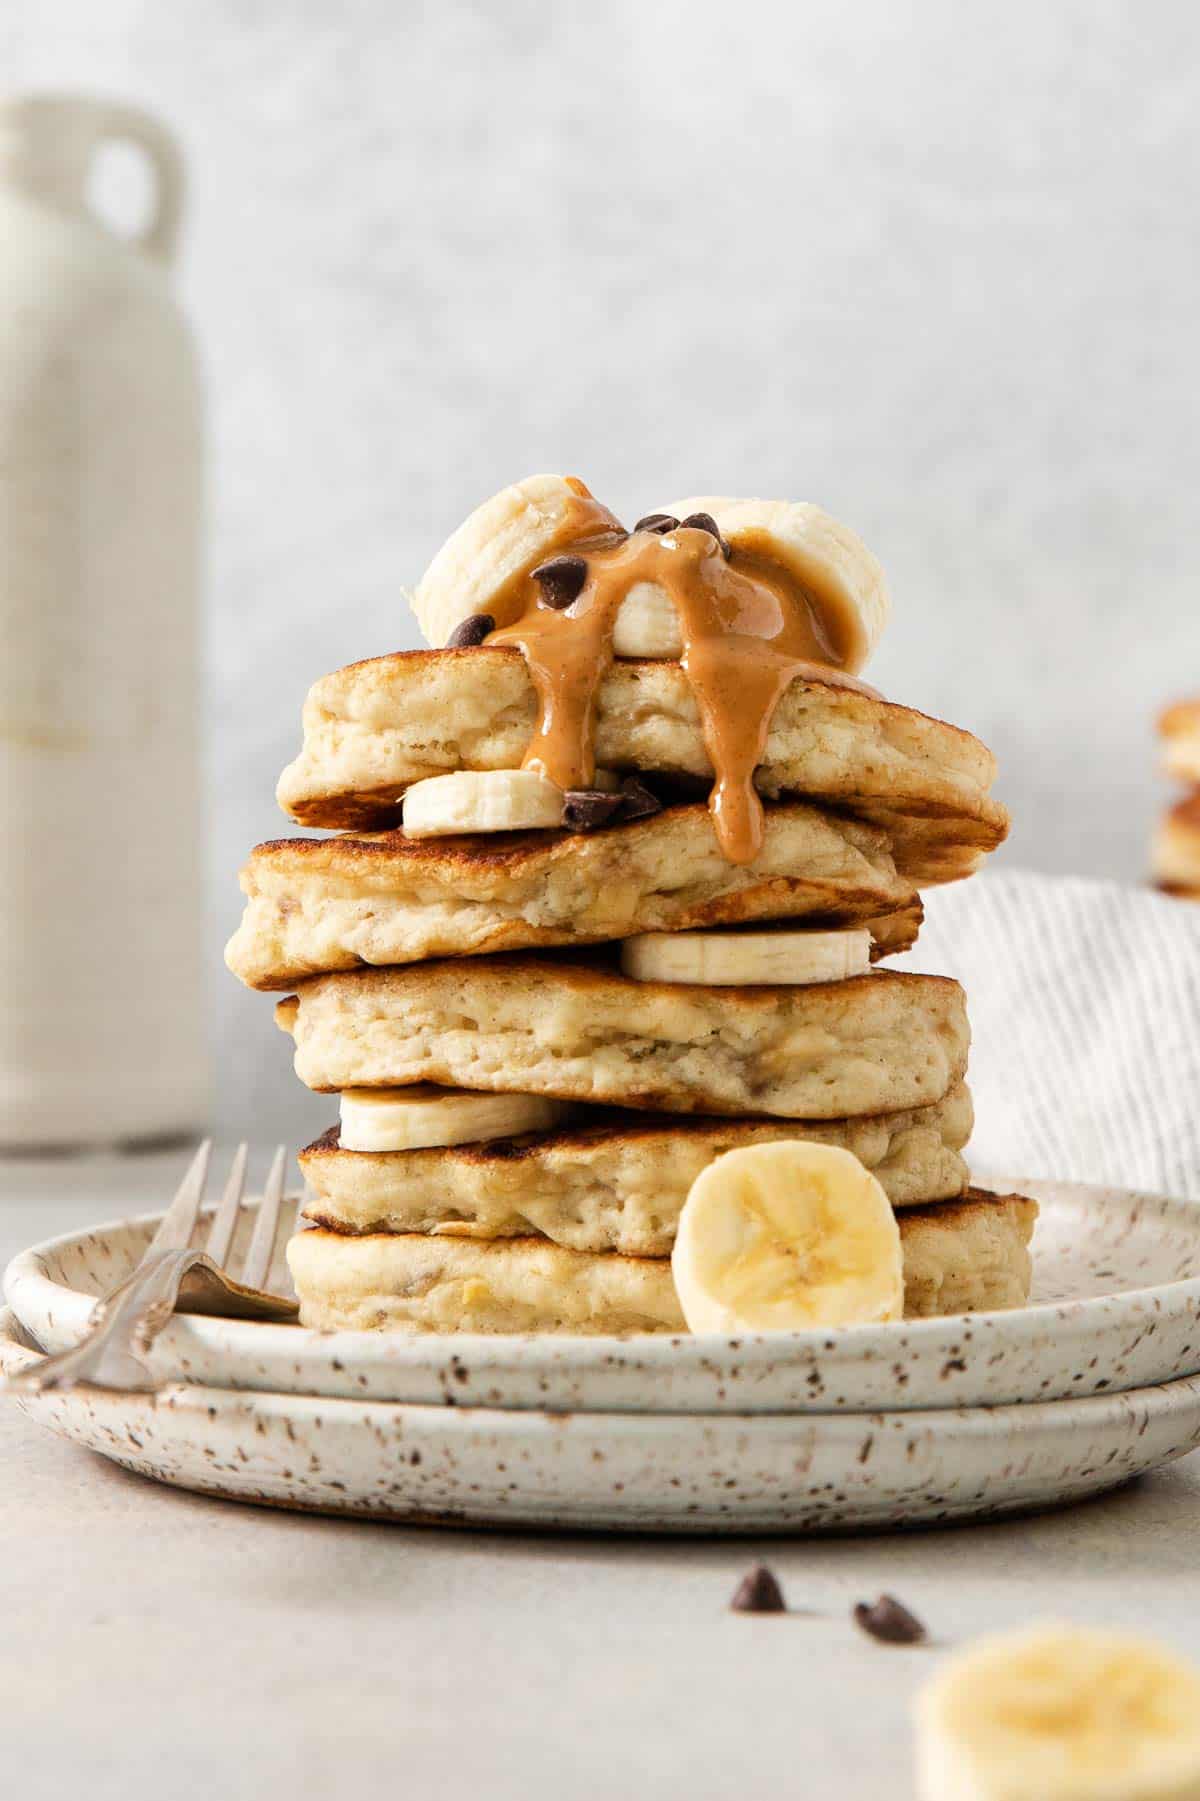 Gluten-free banana pancakes stacked on a plate with a drizzle of peanut butter and banana slices on top